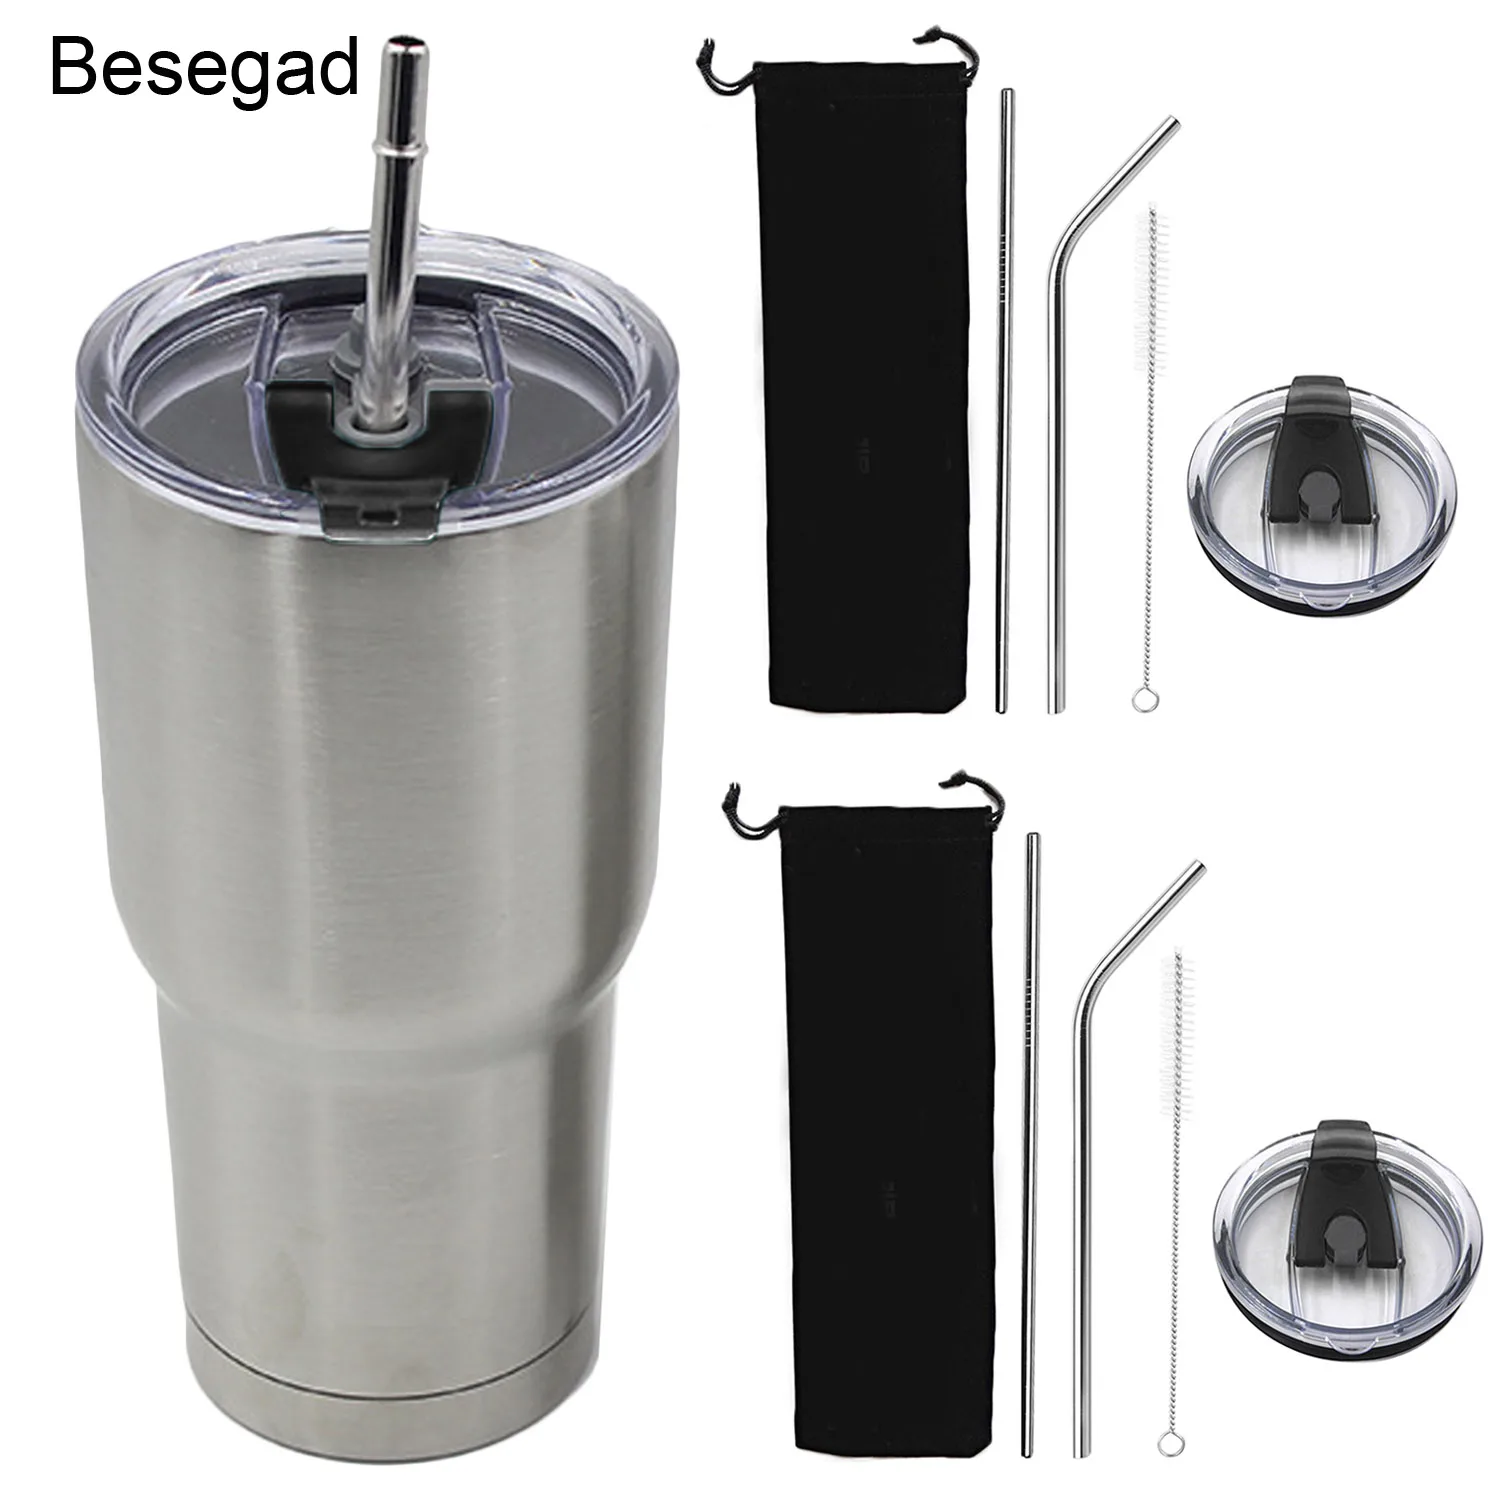 Behogar 1pcs Spill Proof Replacement Tumbler Lids   2pcs Stainless Steel Straws   1pcs Cleaning Brush   1pcs Pouch for Yeti